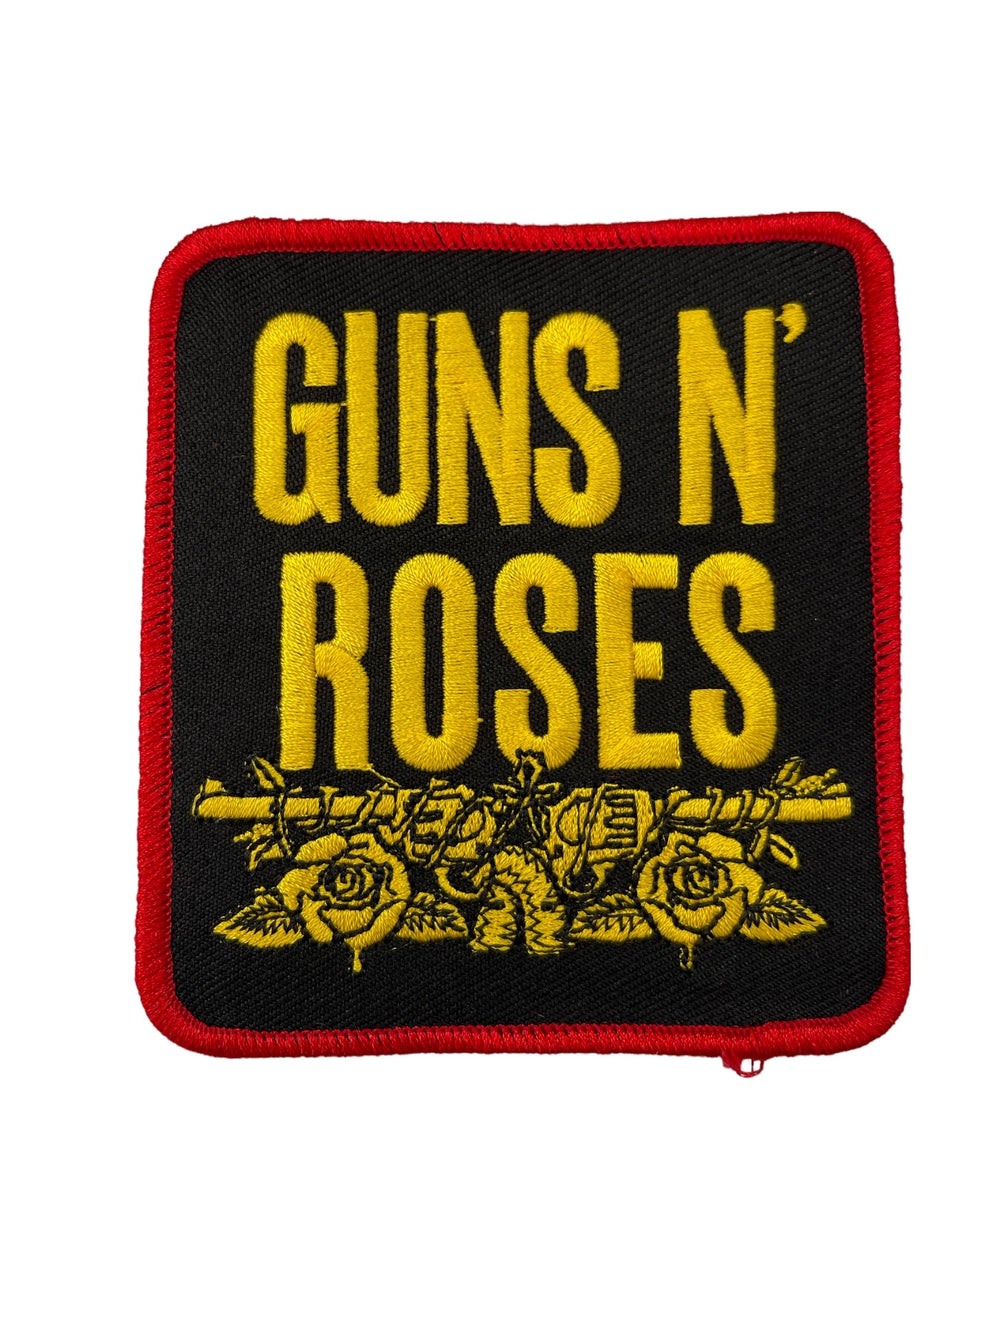 Guns N' Roses Standard Patch: Stacked Black Official Woven Patch Brand New